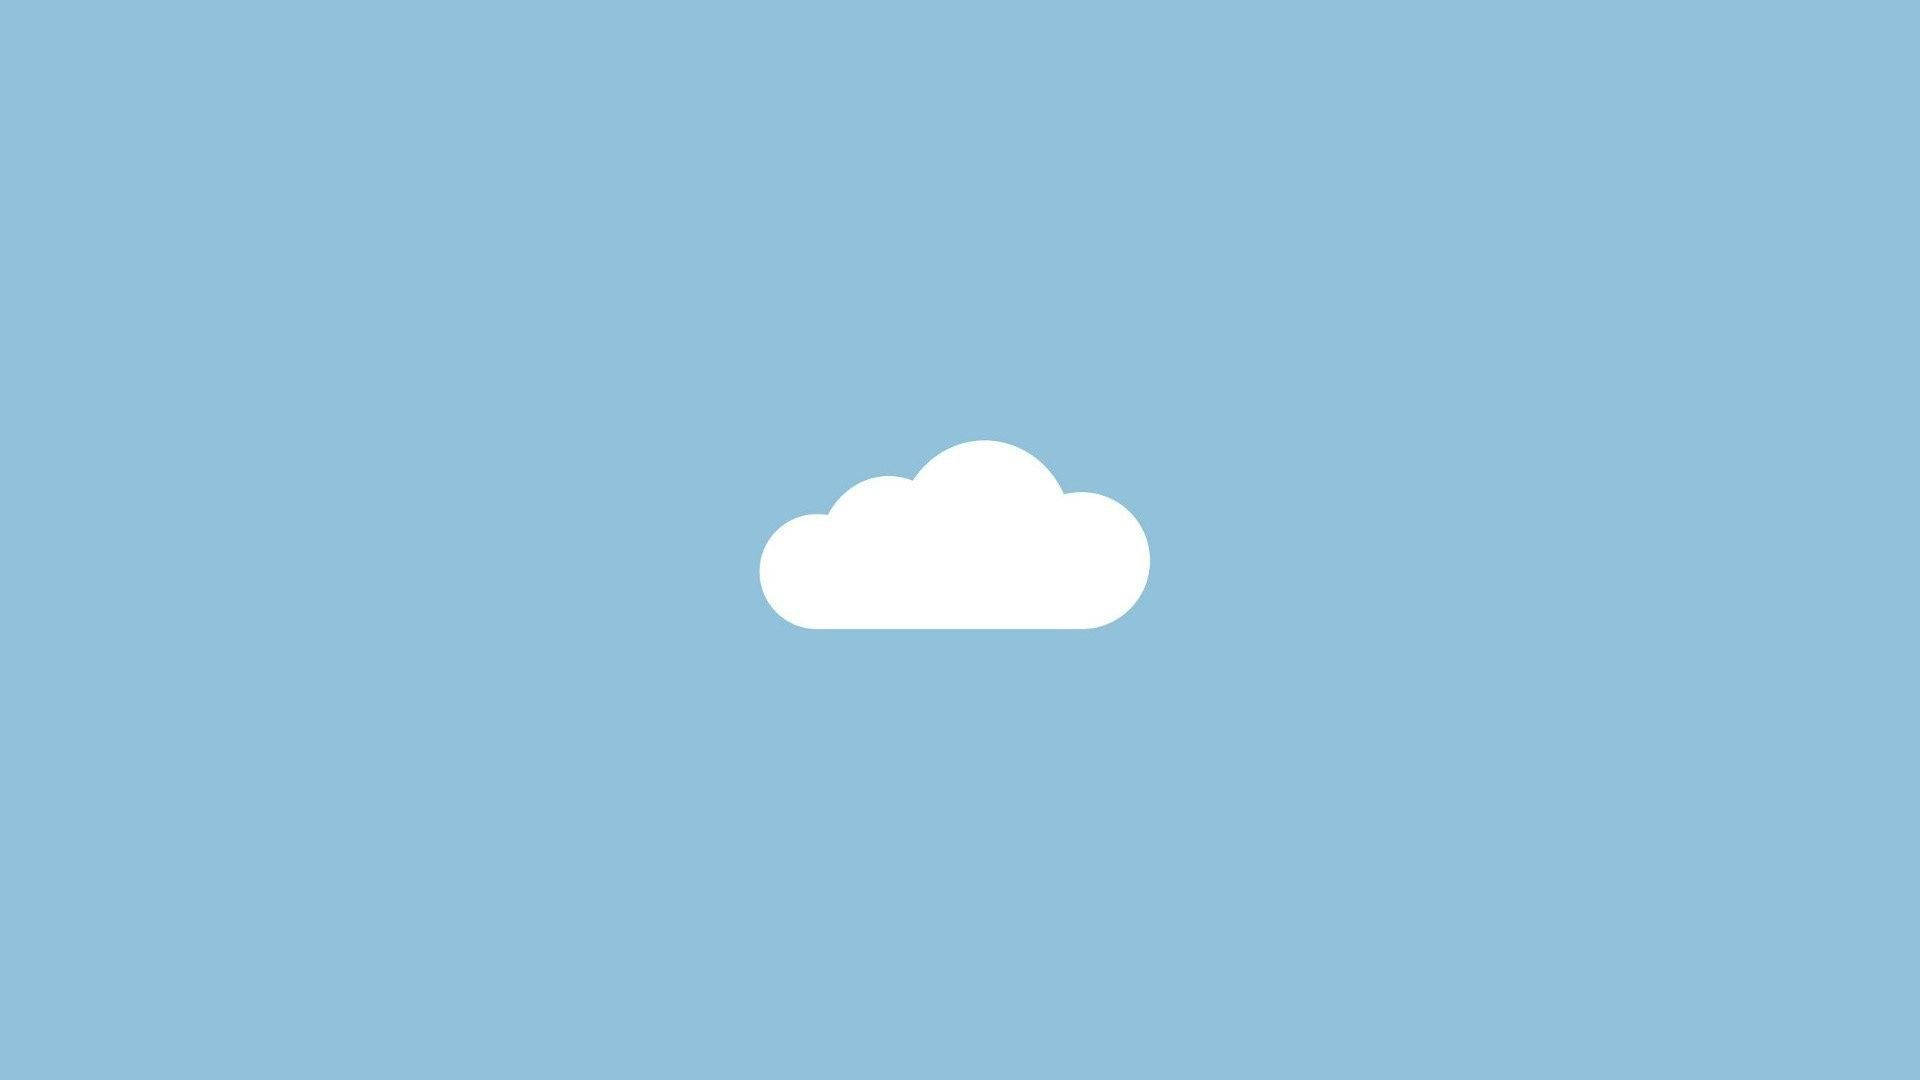 Cloud In A Baby Blue Sky Background